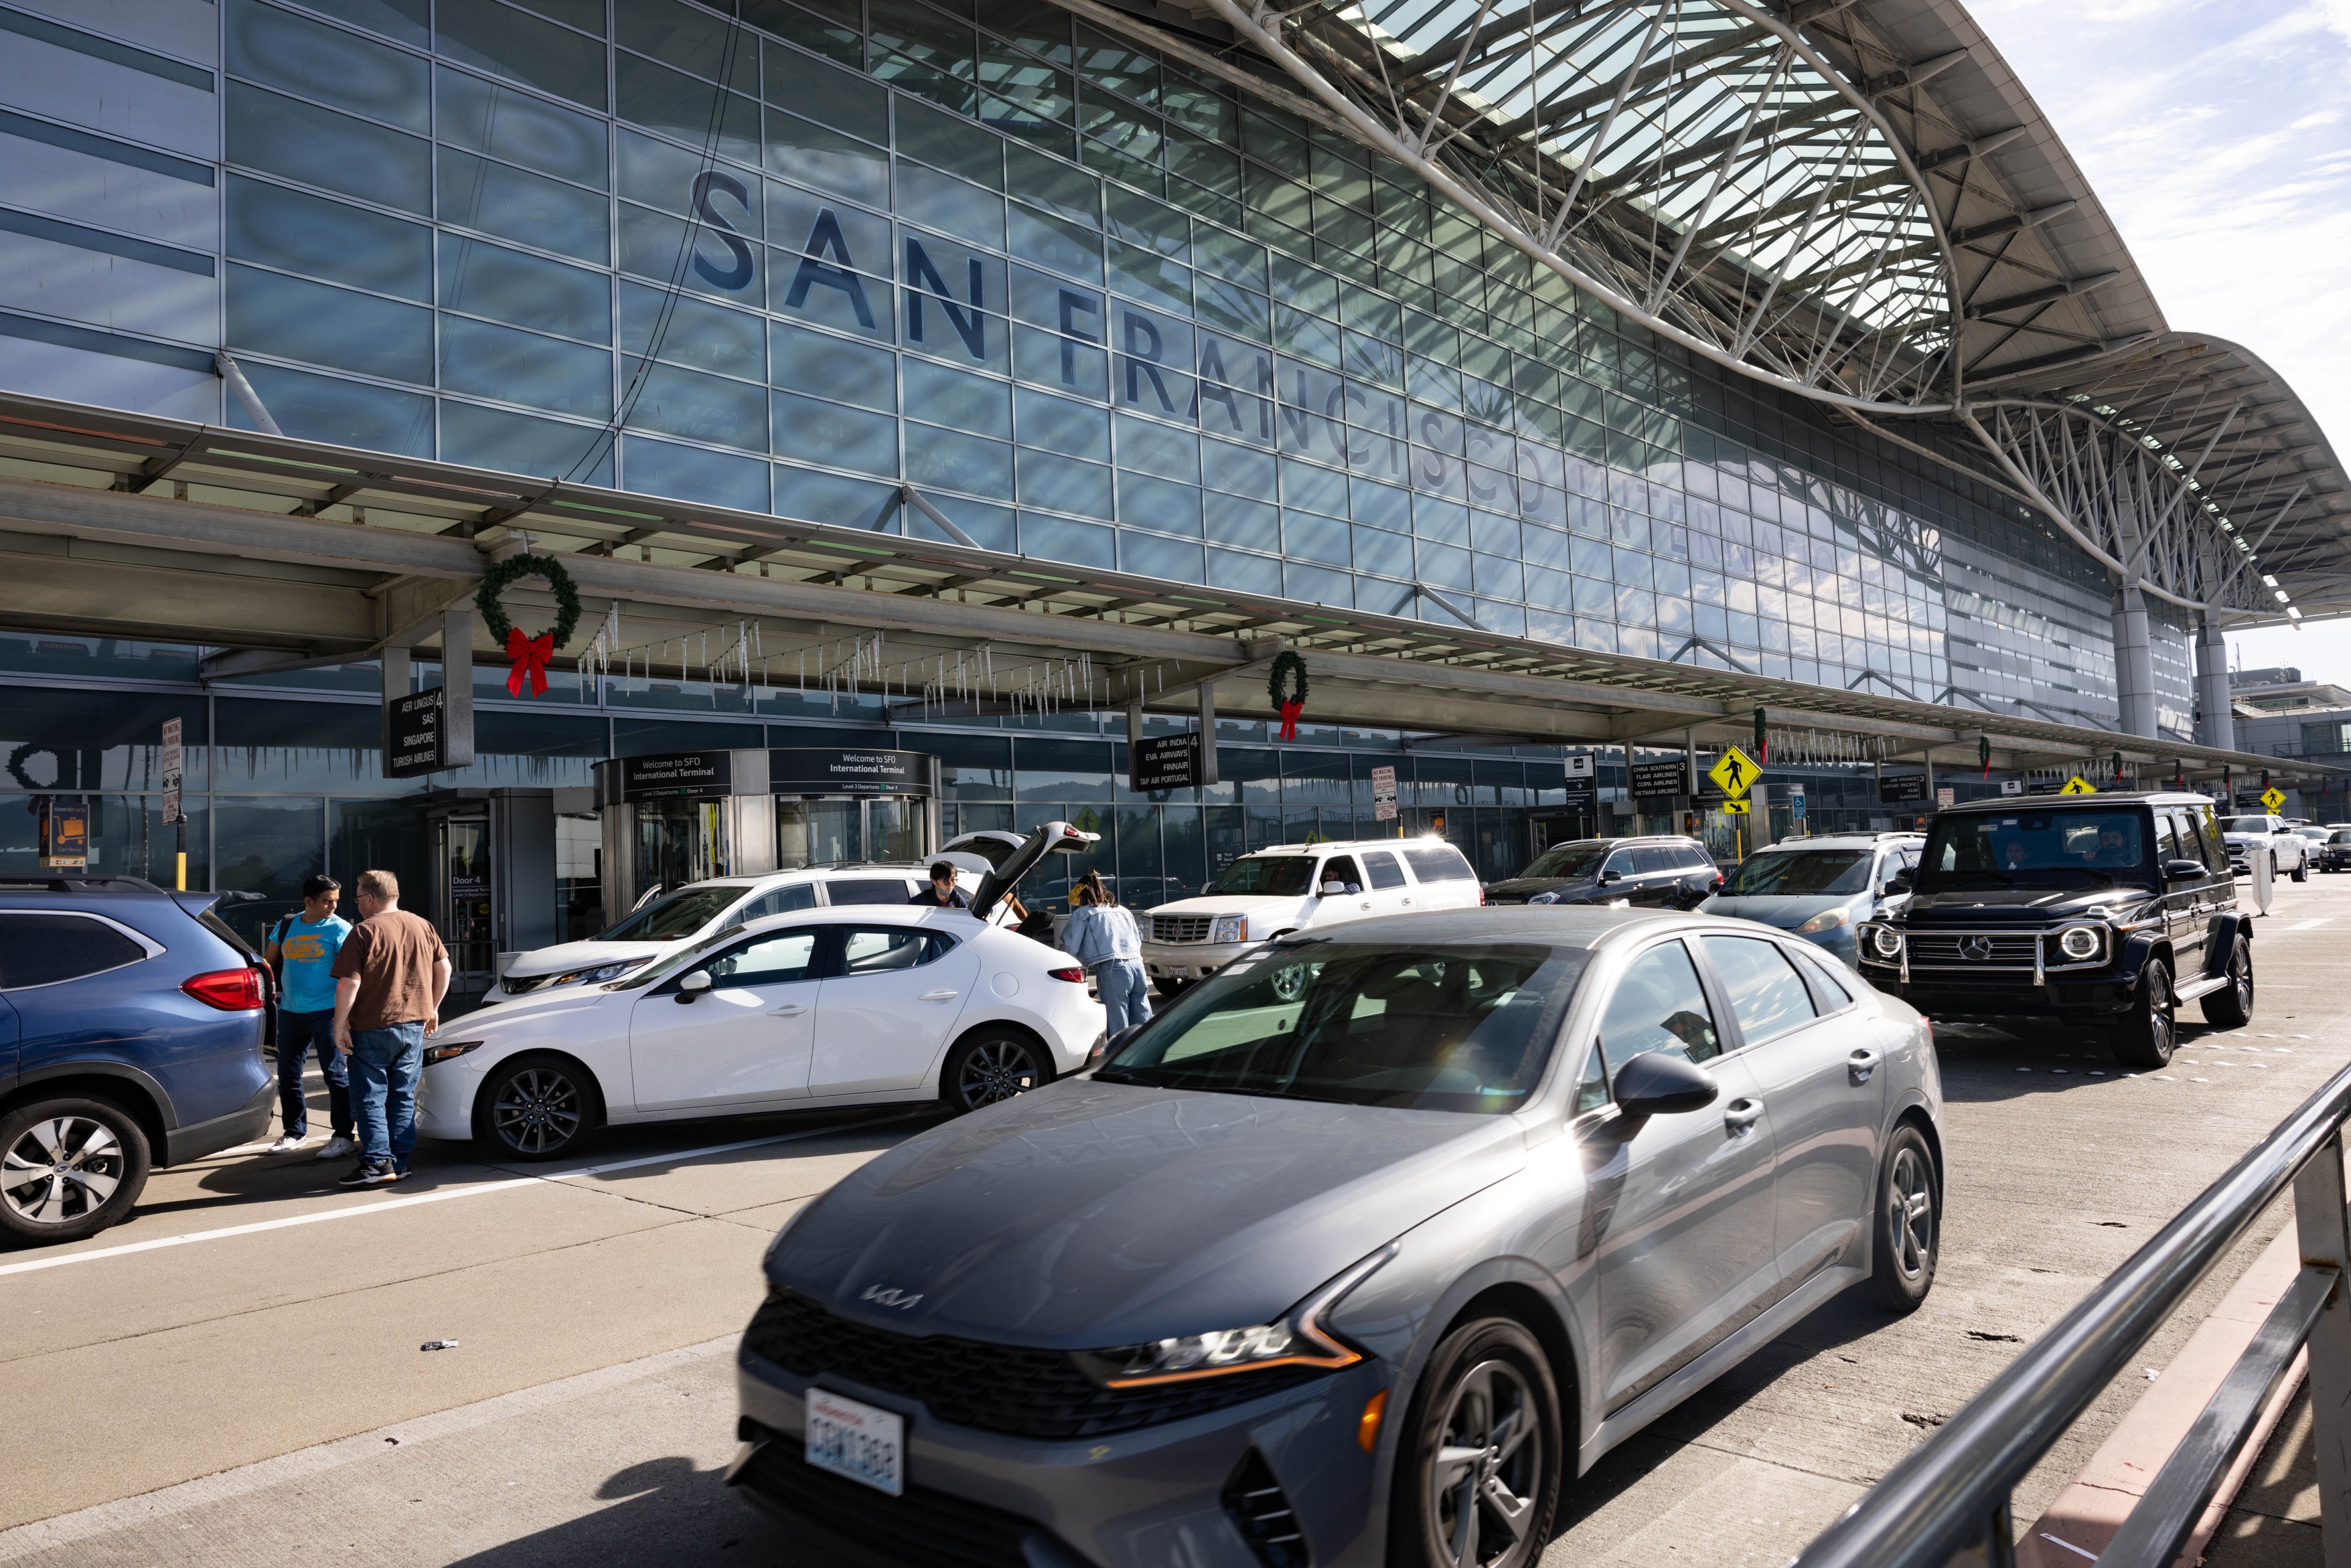 Cars drop off travelers at the San Francisco International Airport International departures level on Wednesday, Nov. 22, 2023. Many are leaving town before the Thanksgiving holiday on Thursday.